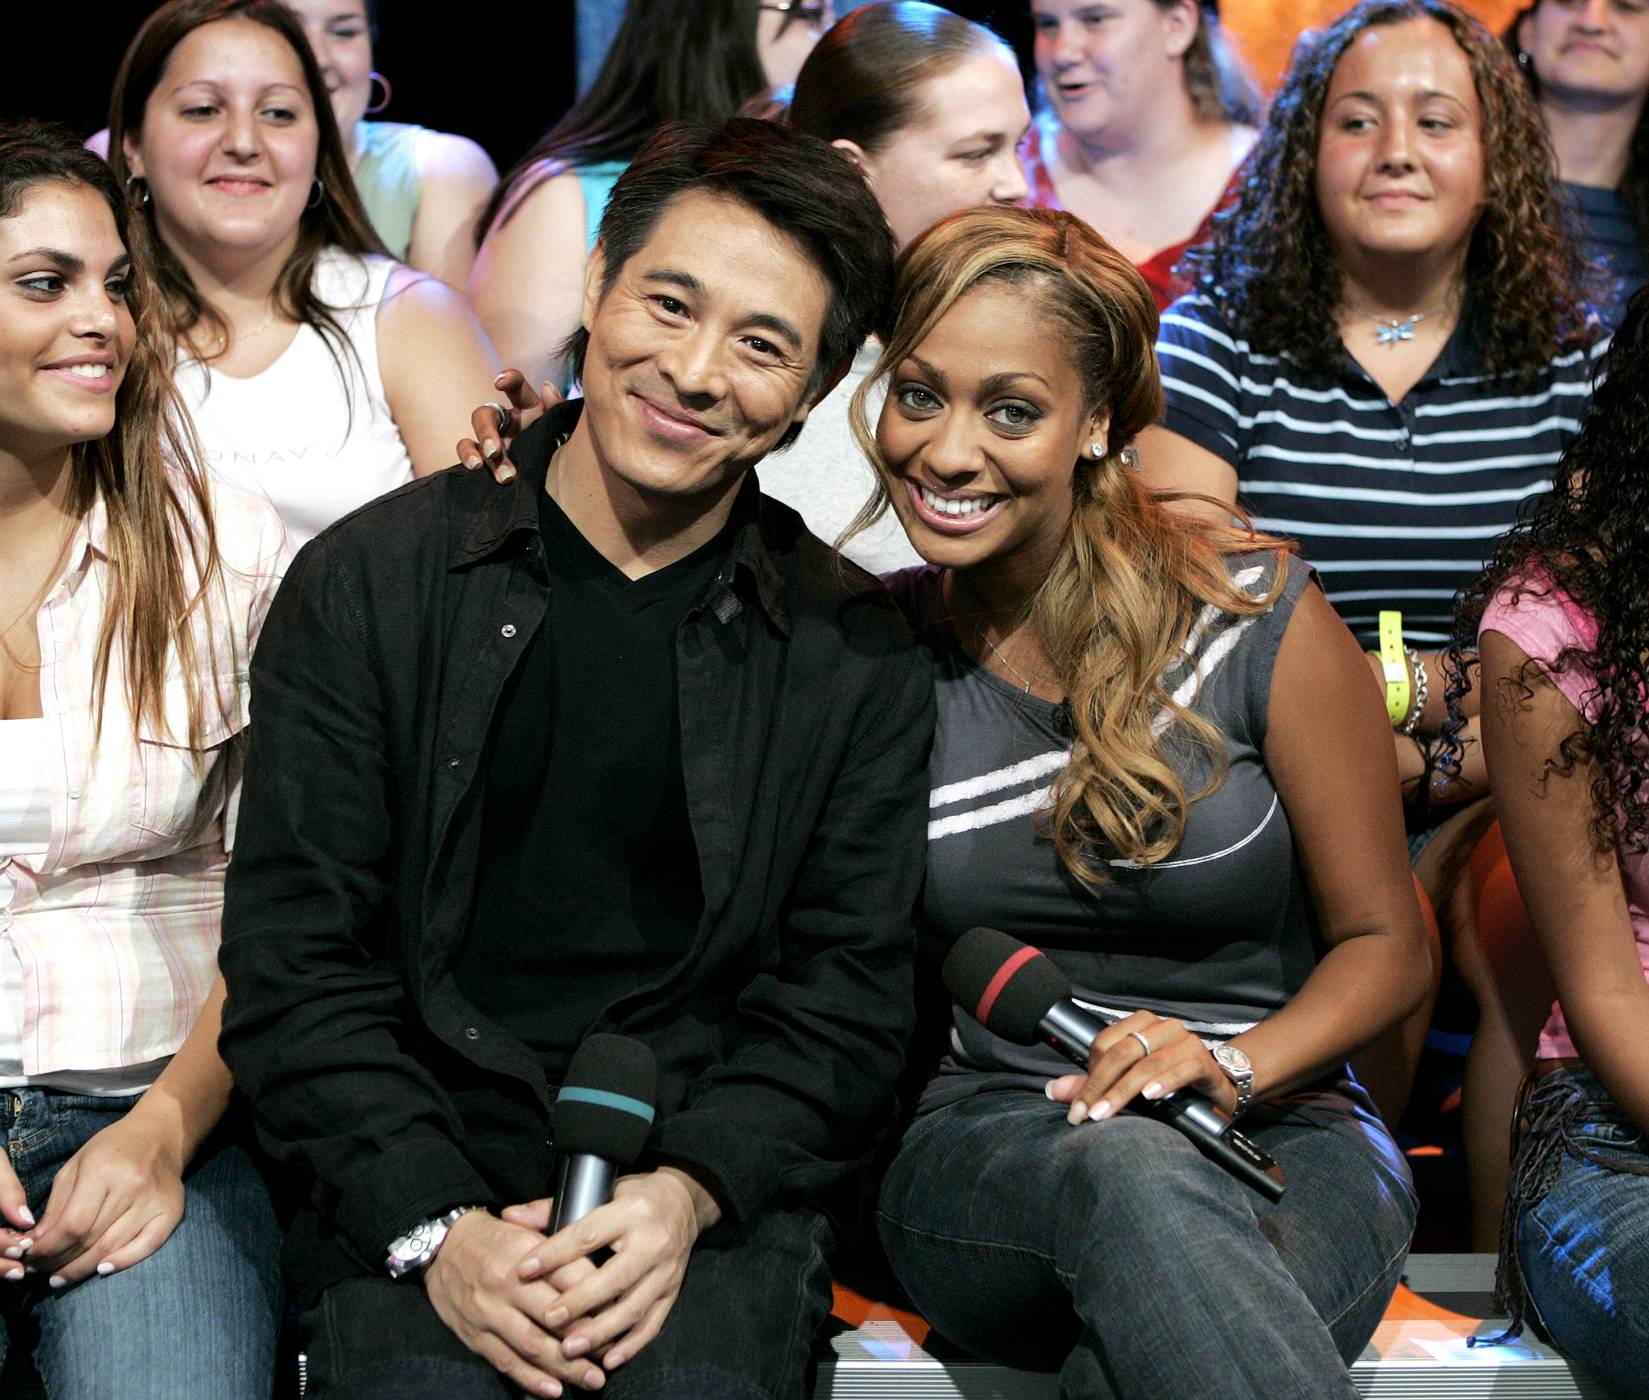 Adored By All - During her time with MTV, La La interviewed all types of reknowned celebrities. Here she interviews legendary actor Jet Li during a 2004 appearance.(Photo: Peter Kramer/Getty Images)